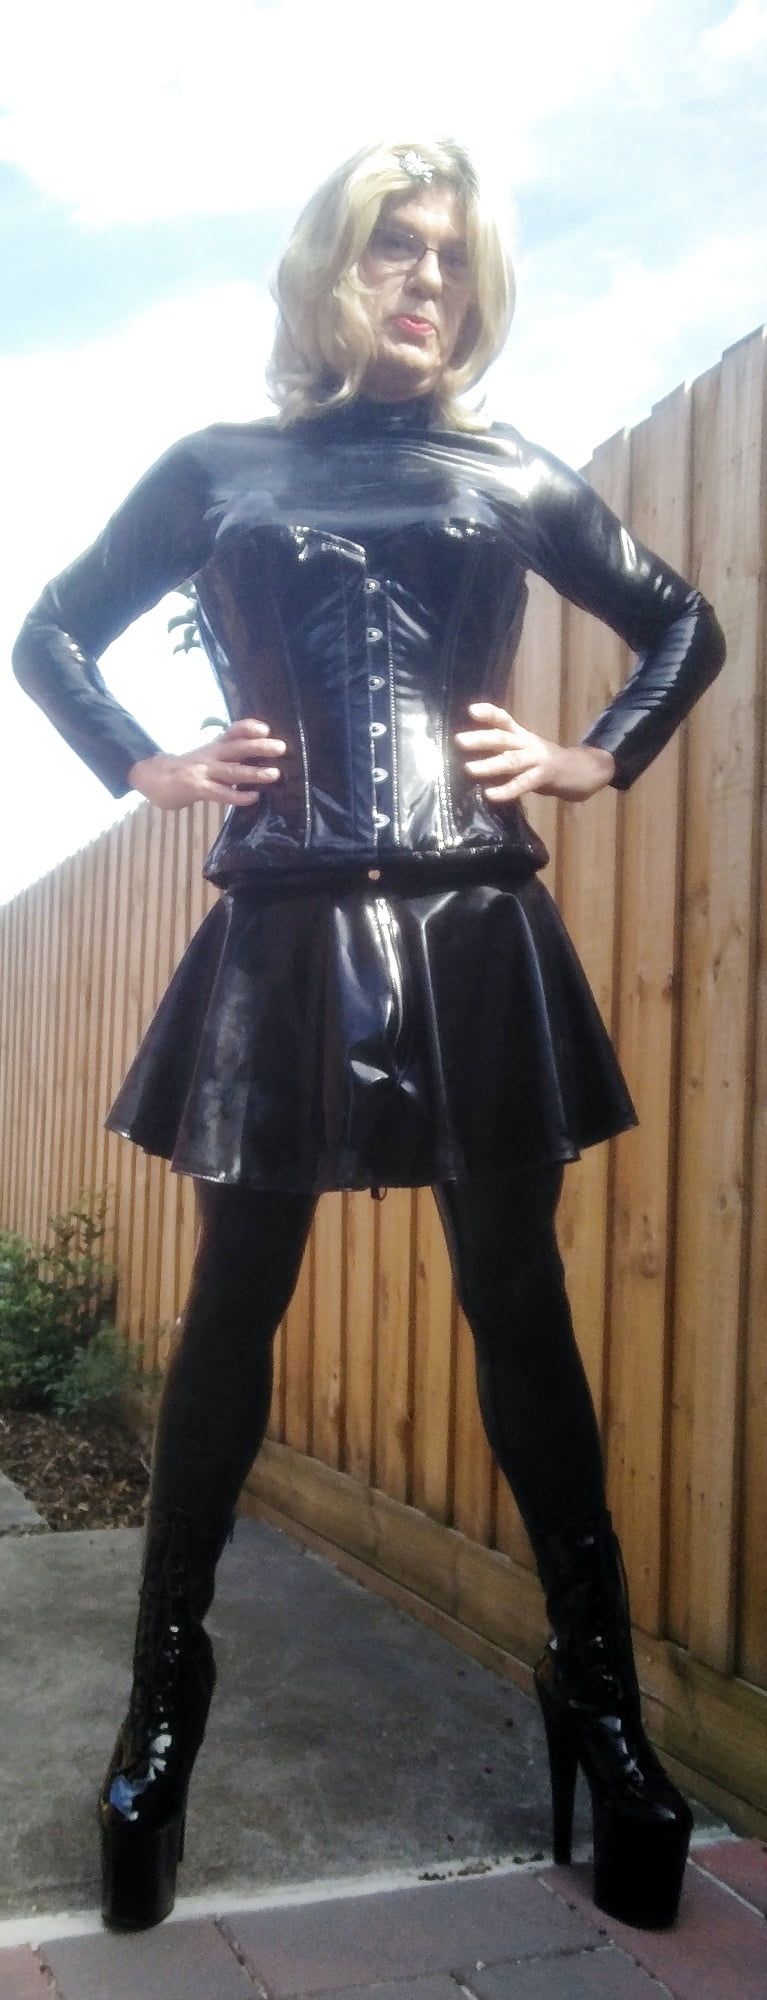 Warm day for latex #3